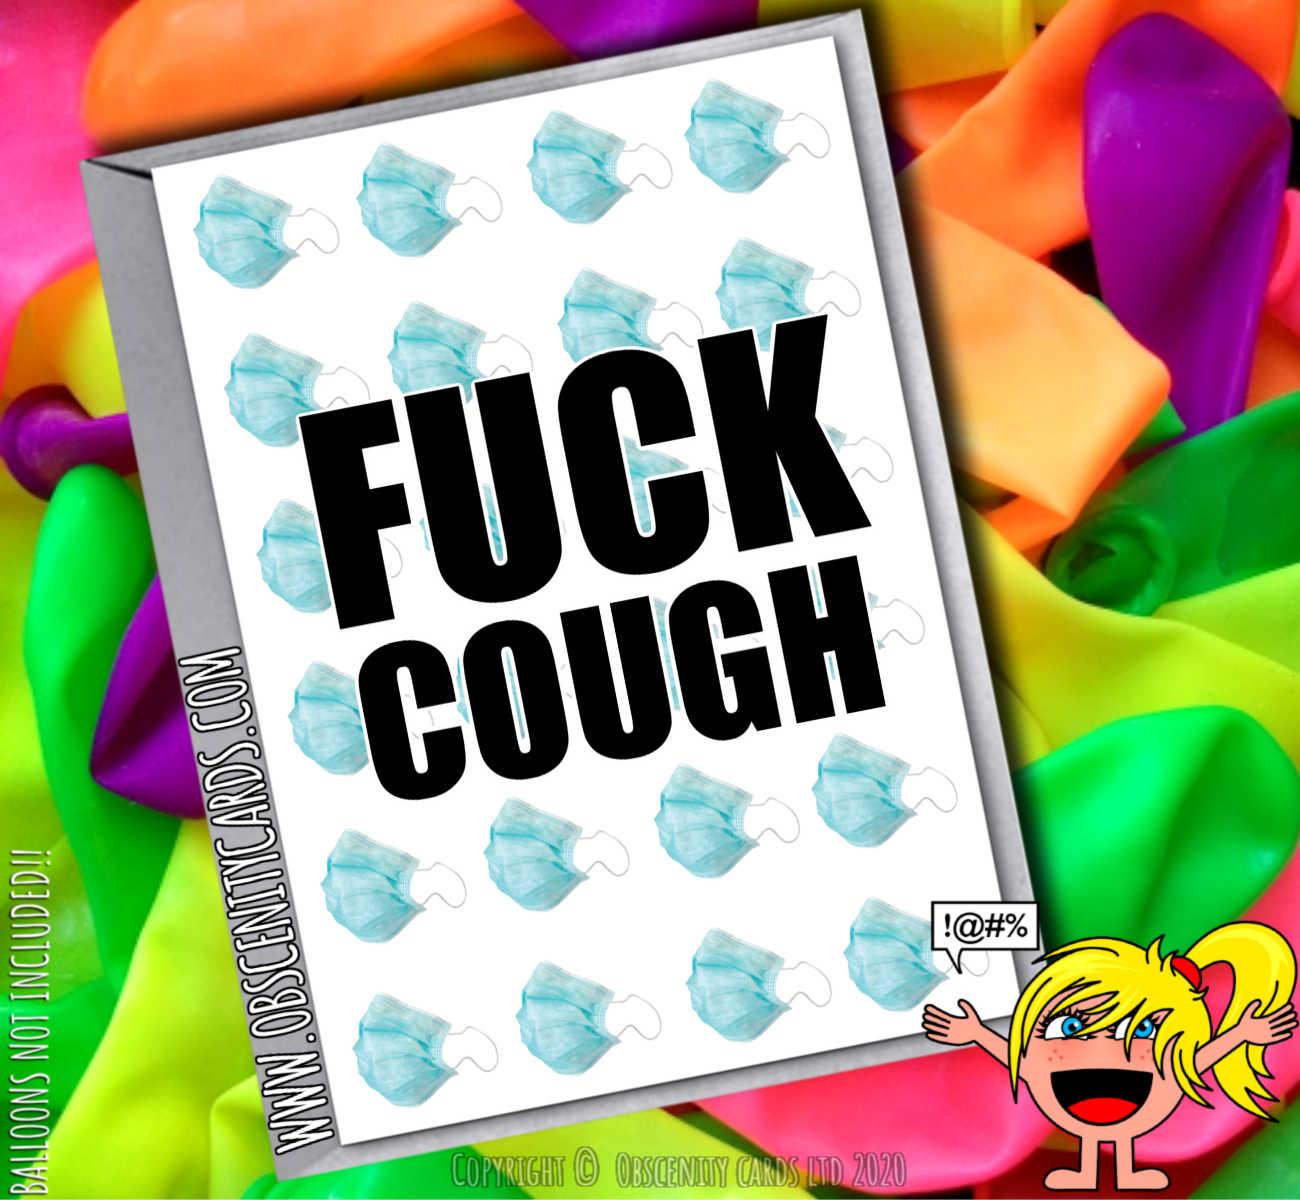 FUCK COUGH SELF ISOLATION CARD